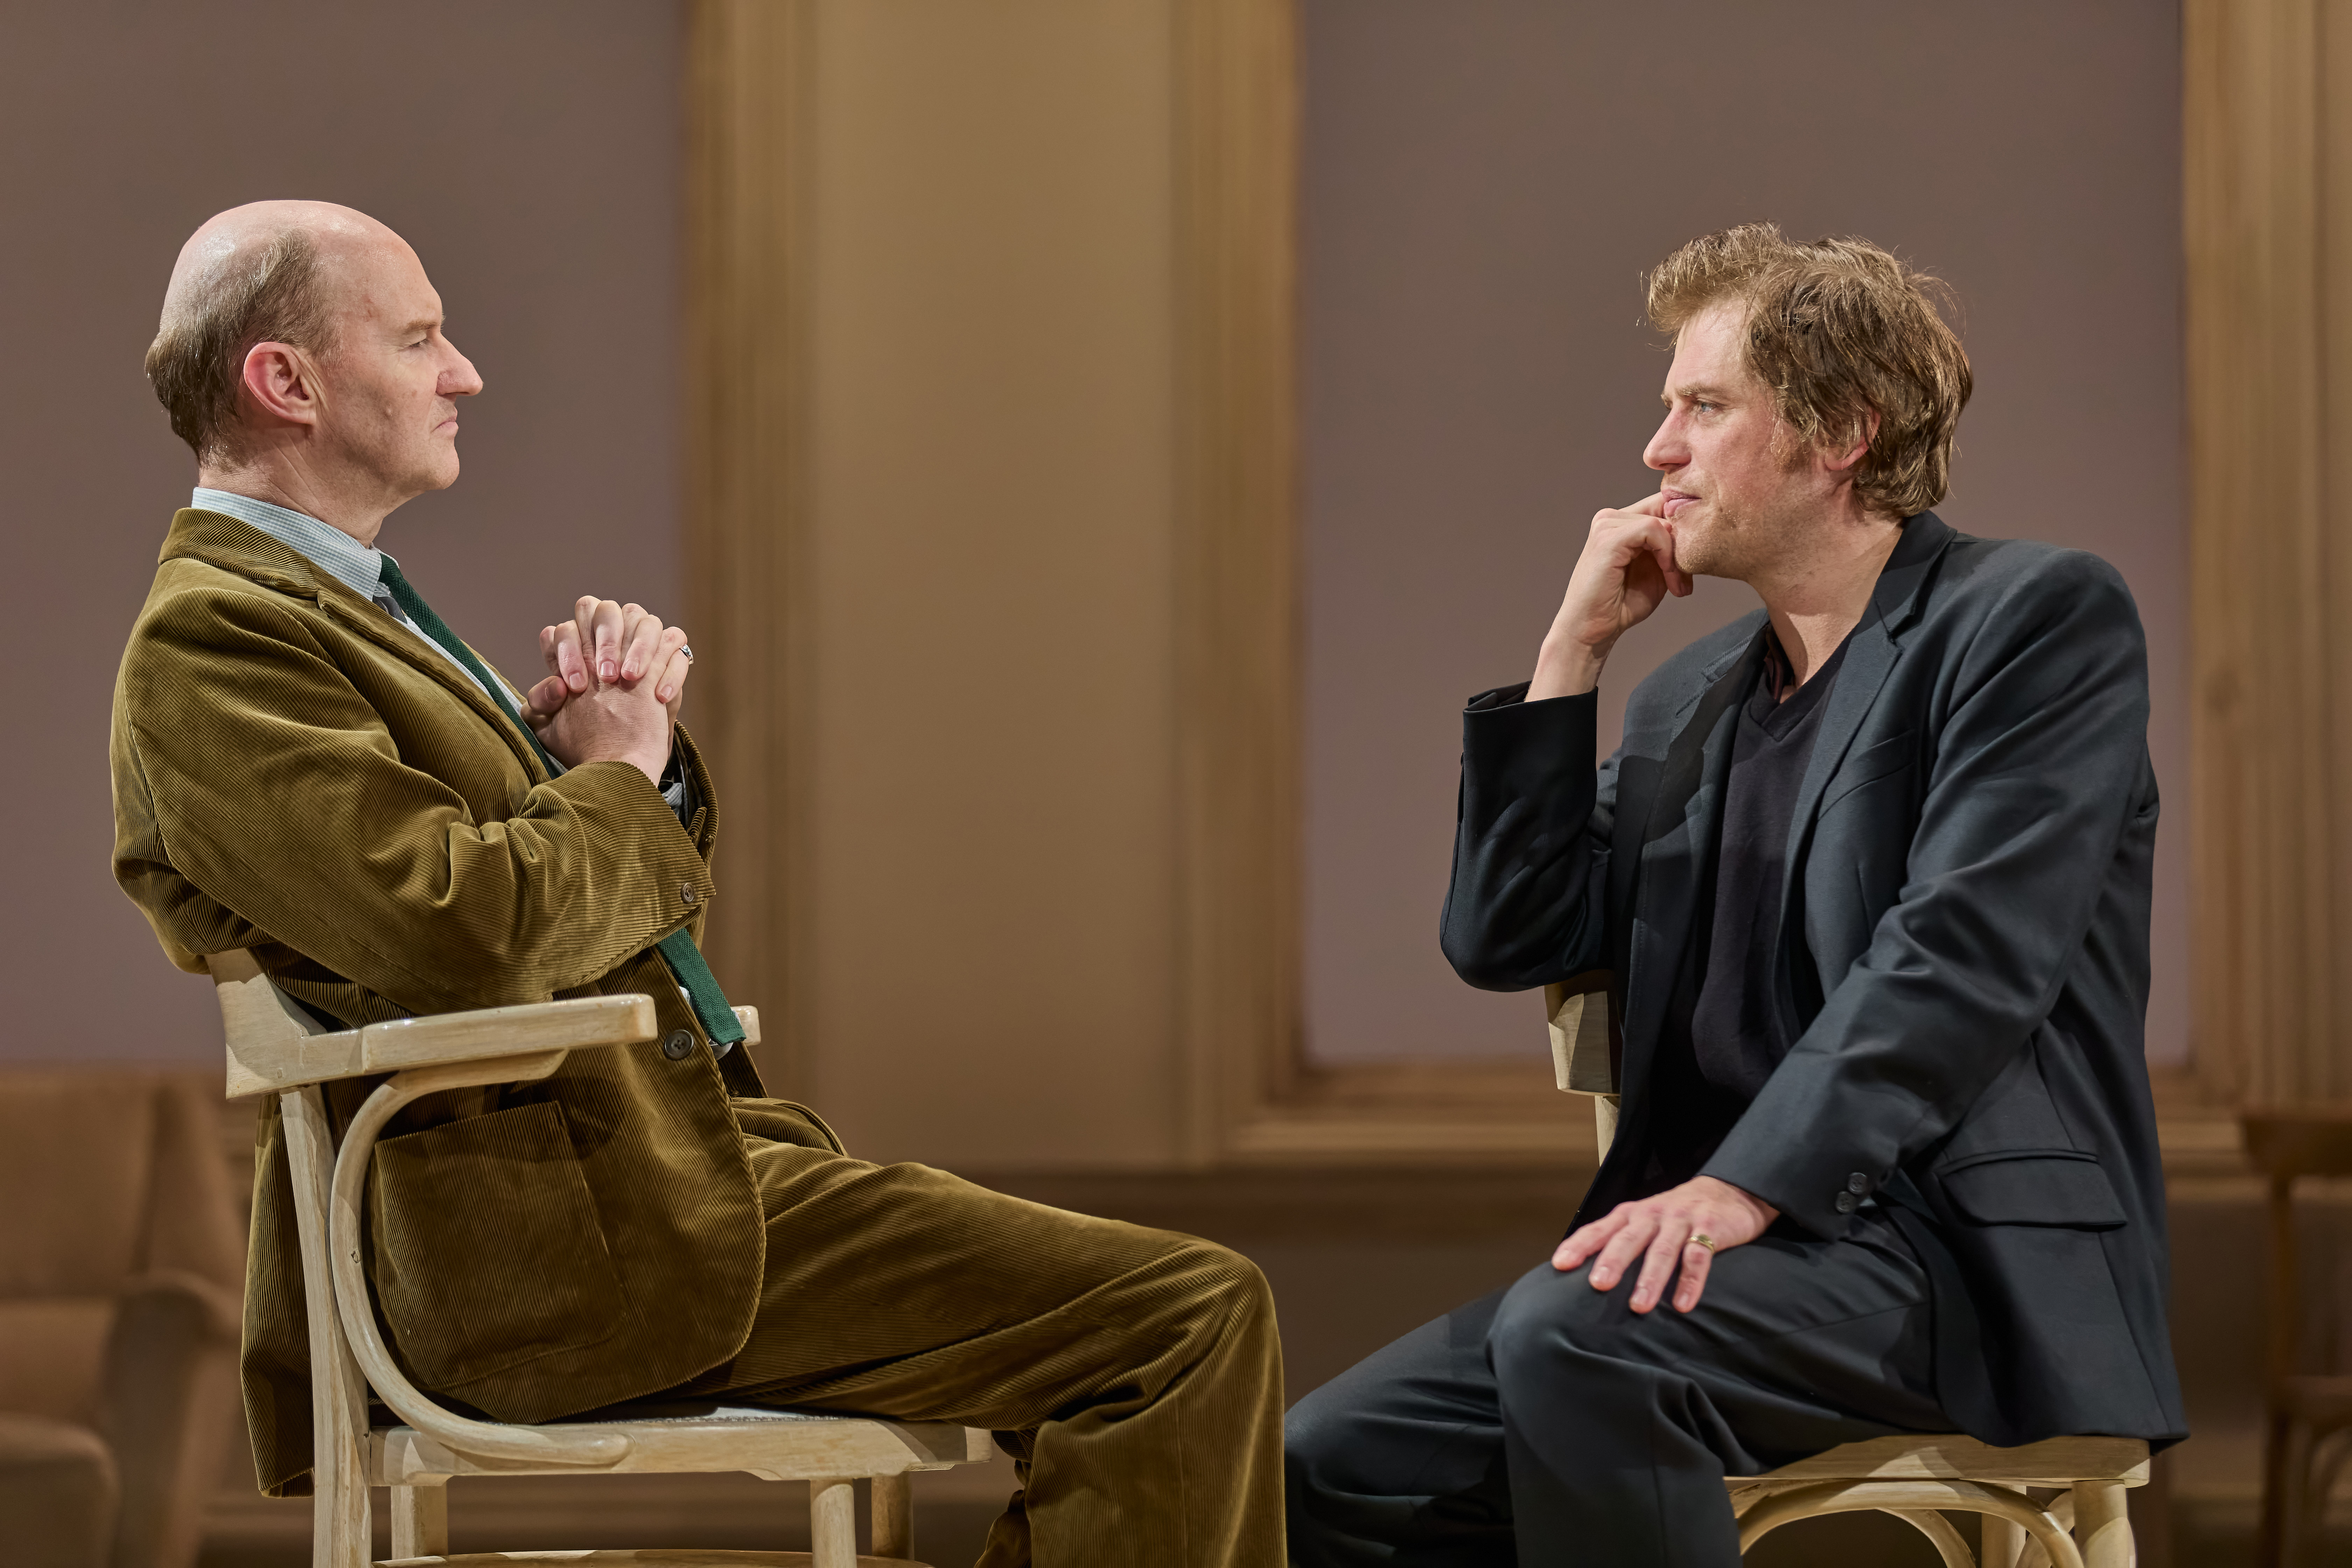 Mark Gatiss (as John Gielgud) and Johnny Flynn (as Richard Burton) in a scene from The Motive and the Cue in the West End